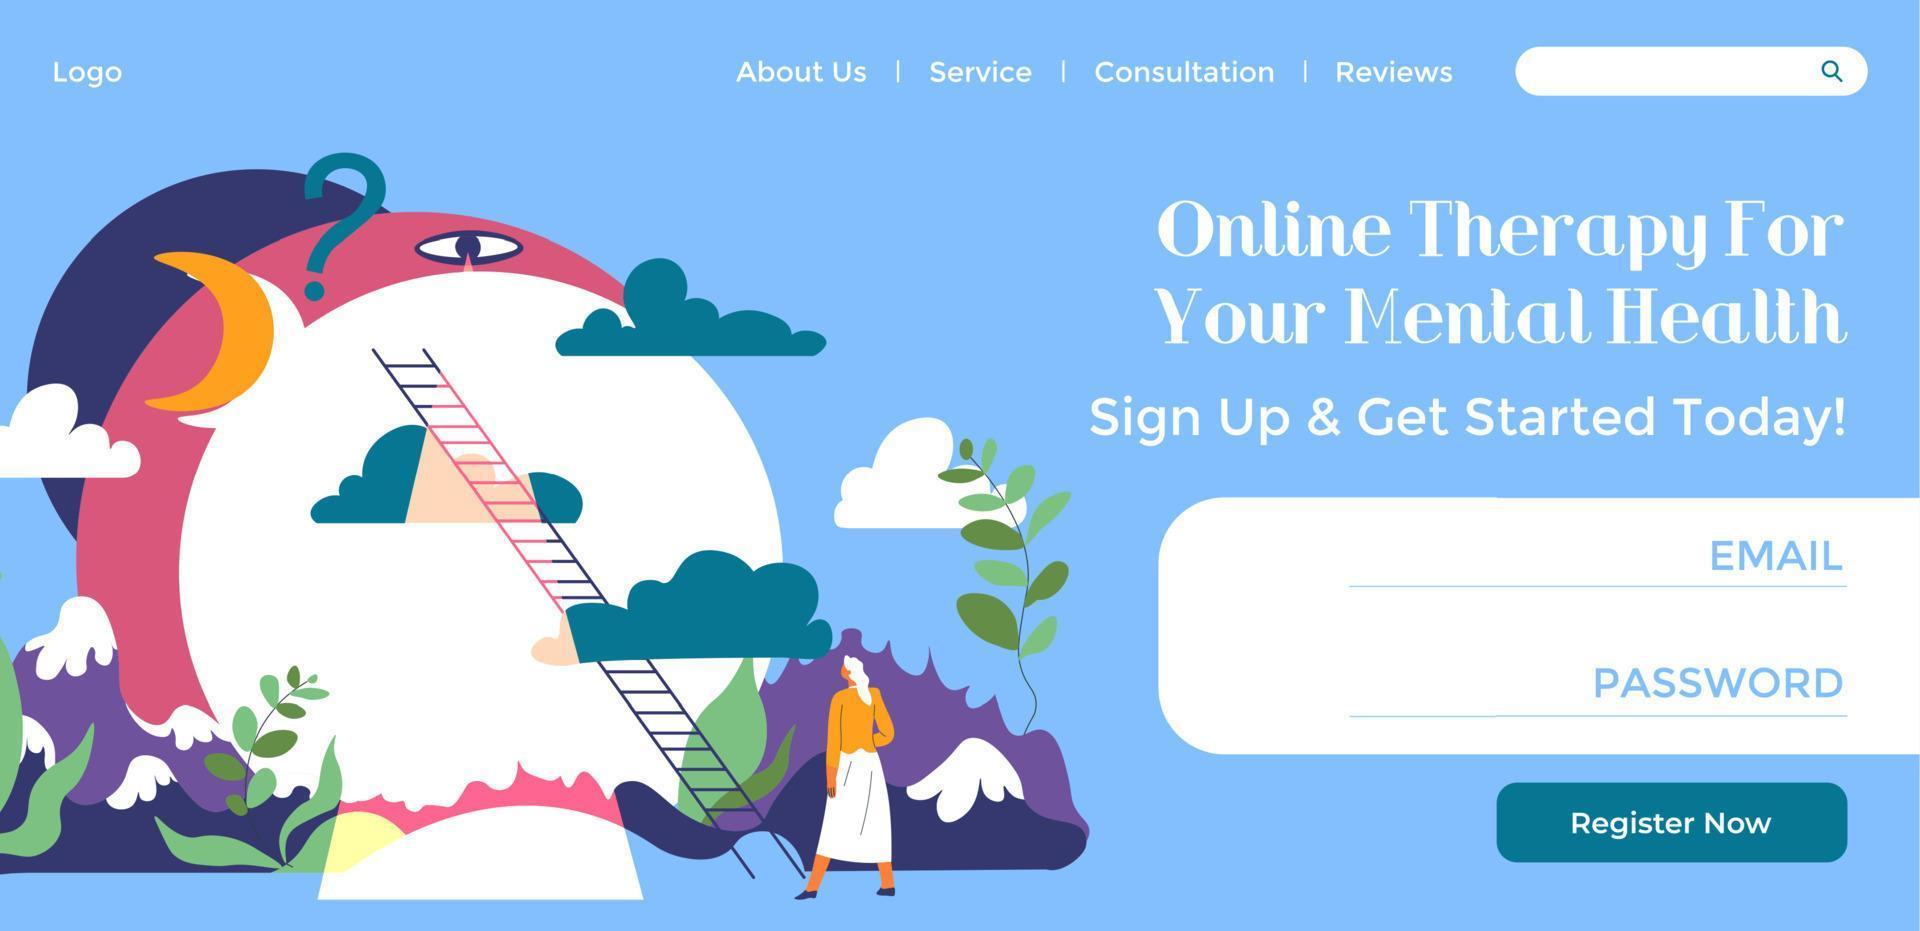 Online therapy for your mental health sign up vector